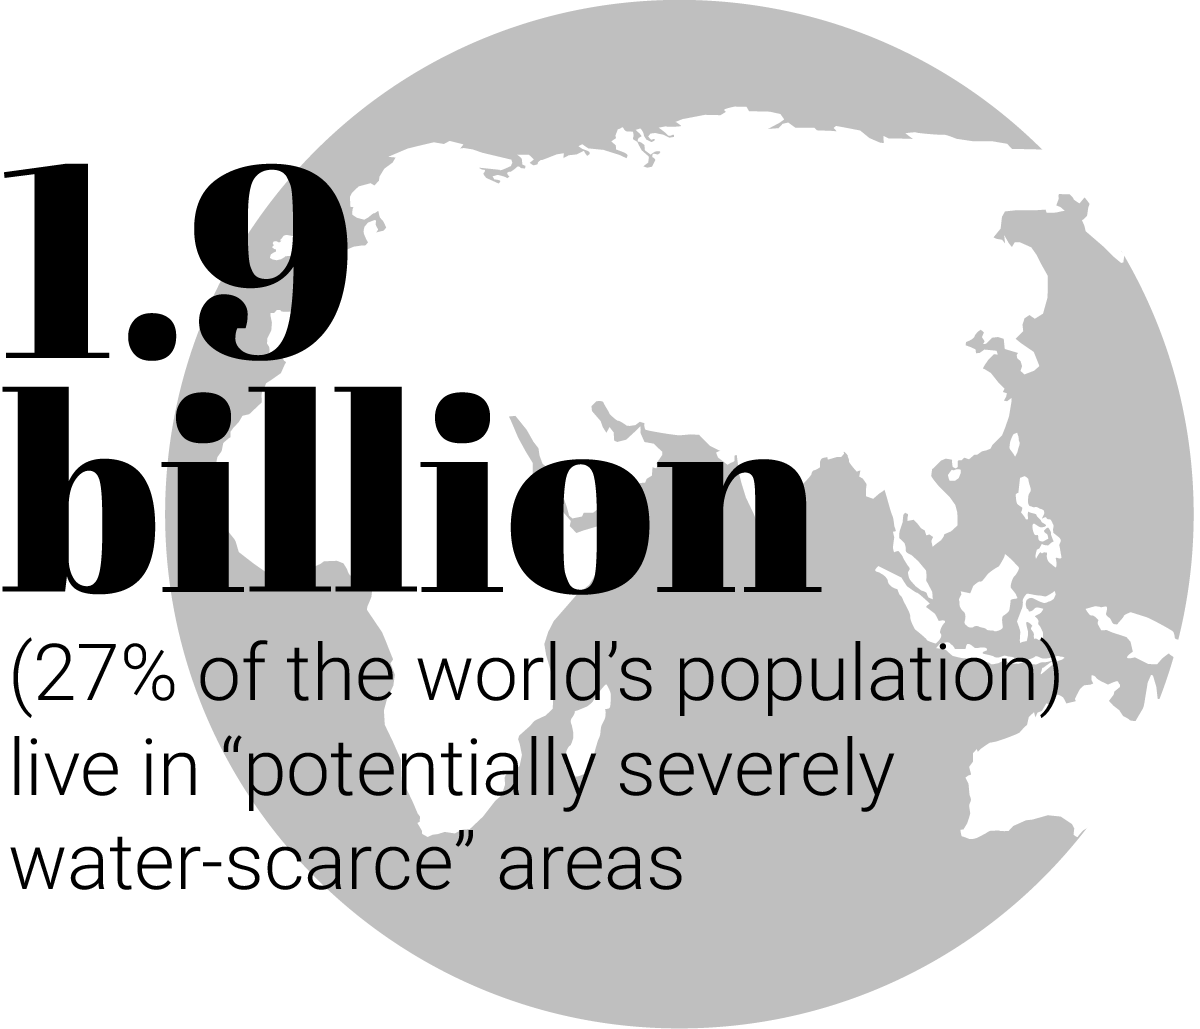 According to the United Nations, 1.9 billion people (27 percent of the world’s population) live in “potentially severely water-scarce” areas